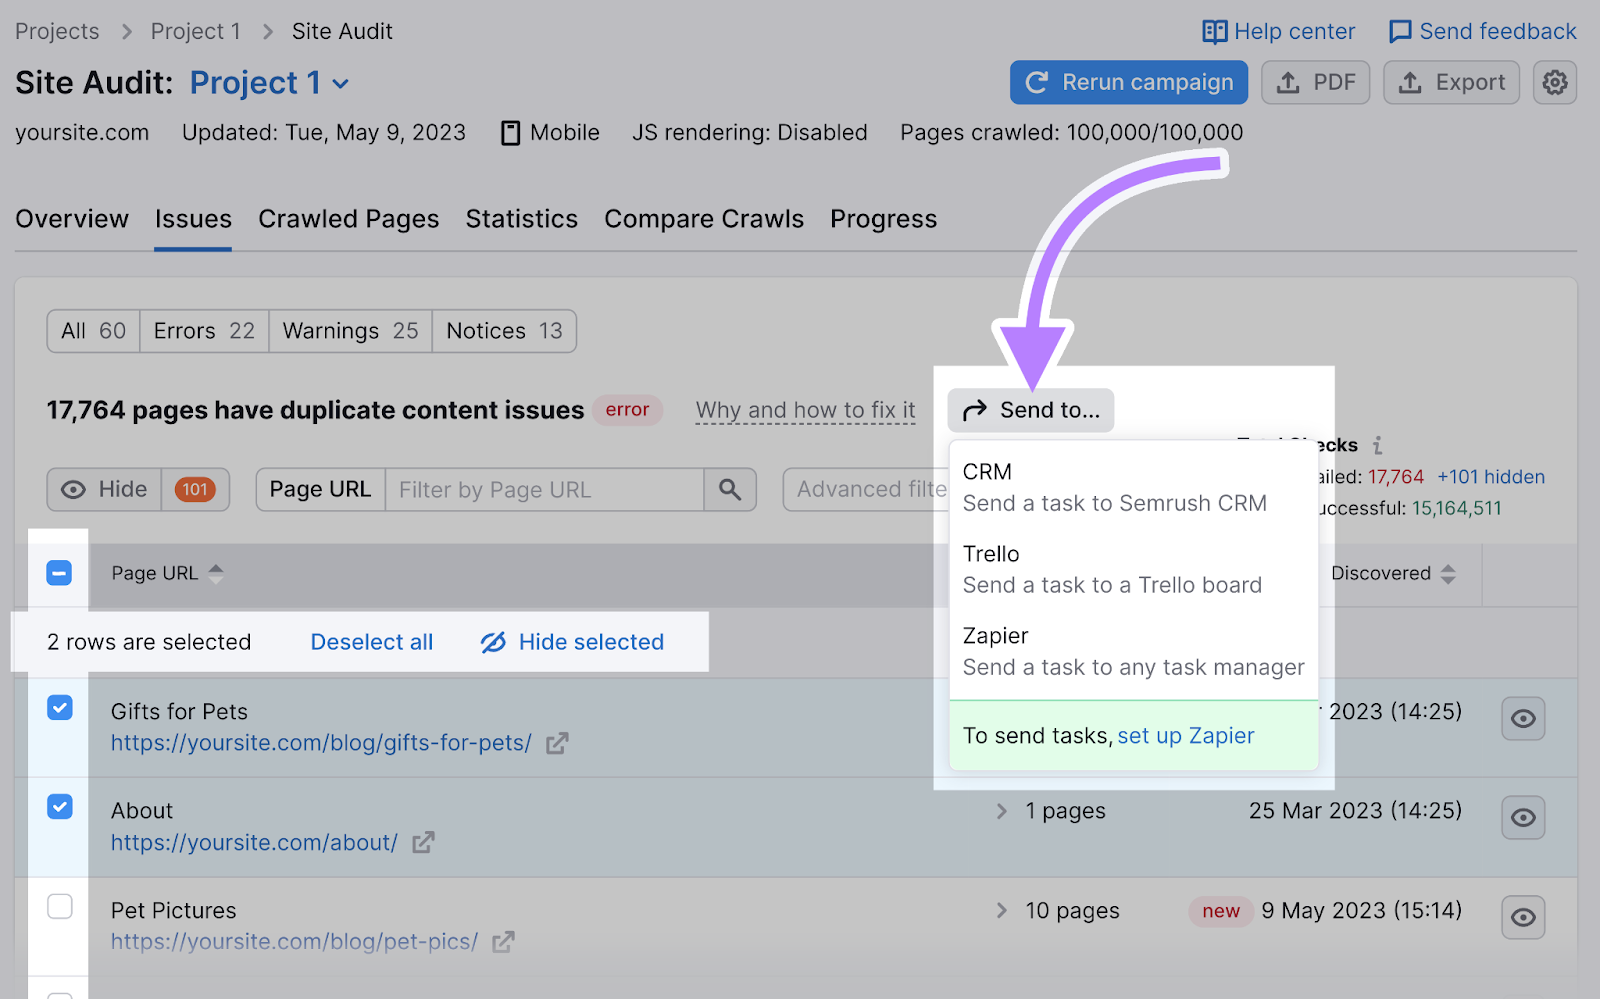 “Send to…” button in Site Audit with drop-down menu options: "CRM", "Trello" and "Zapier"